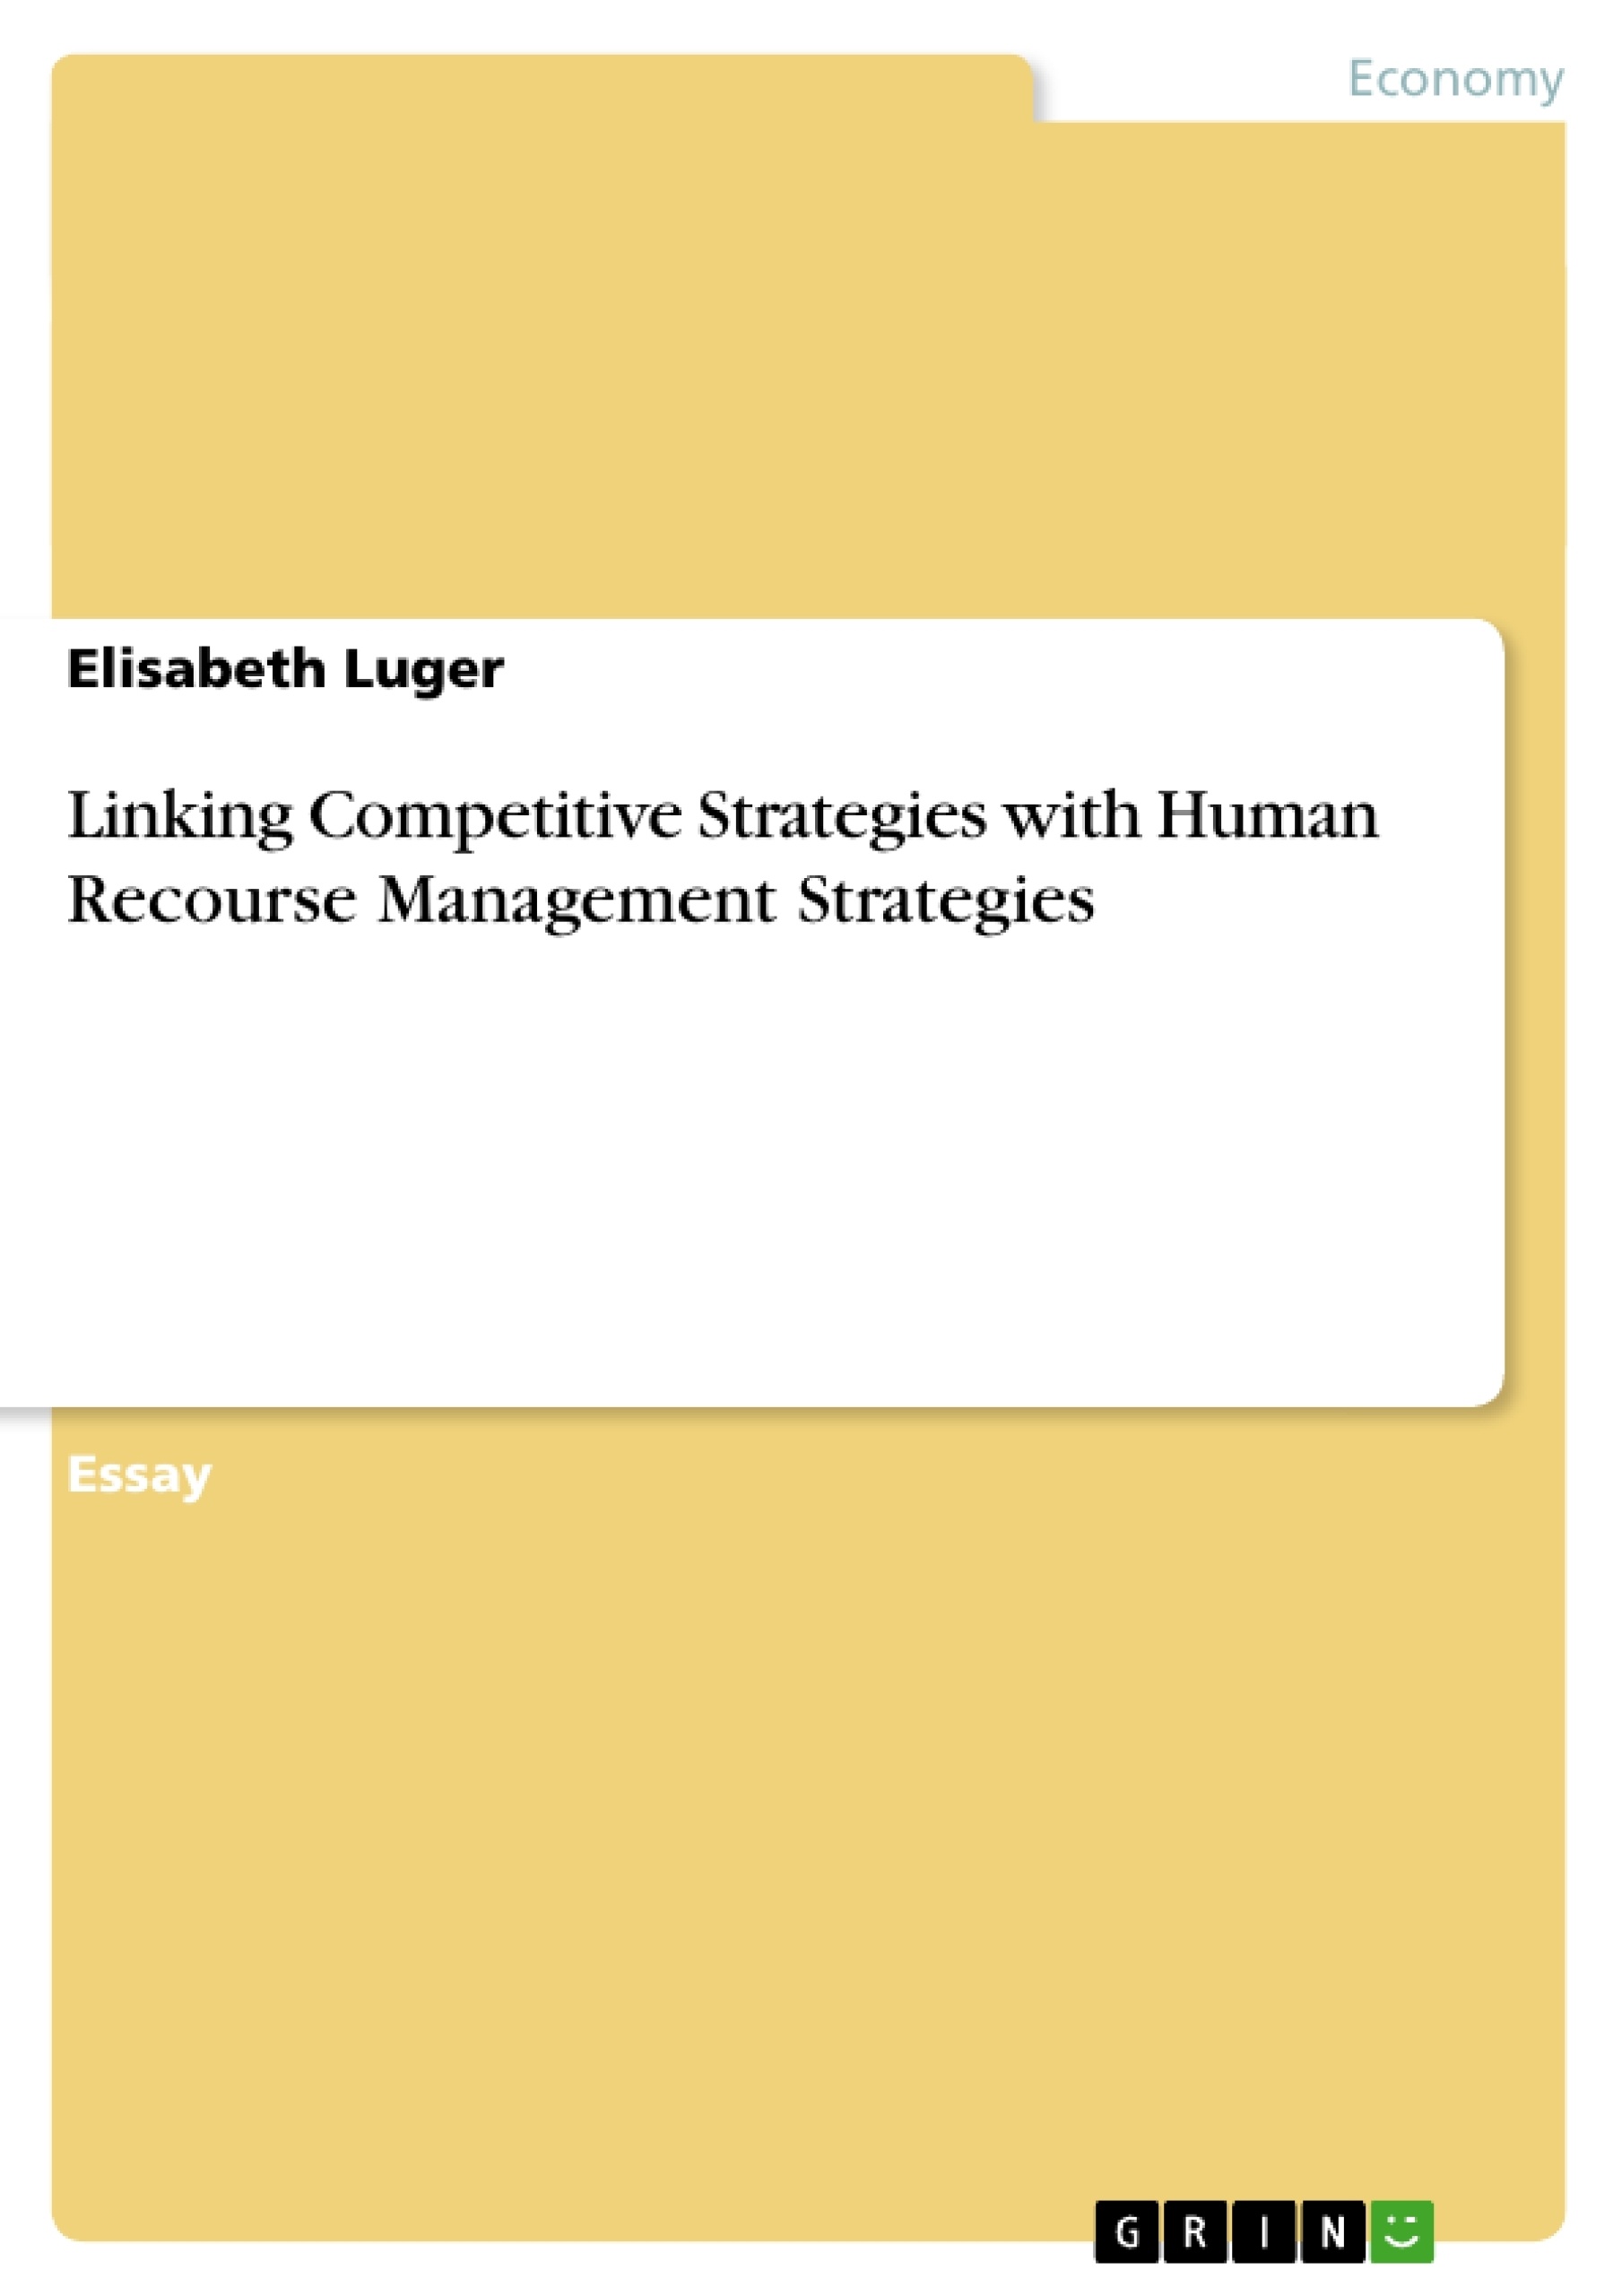 Title: Linking Competitive Strategies with Human Recourse Management Strategies